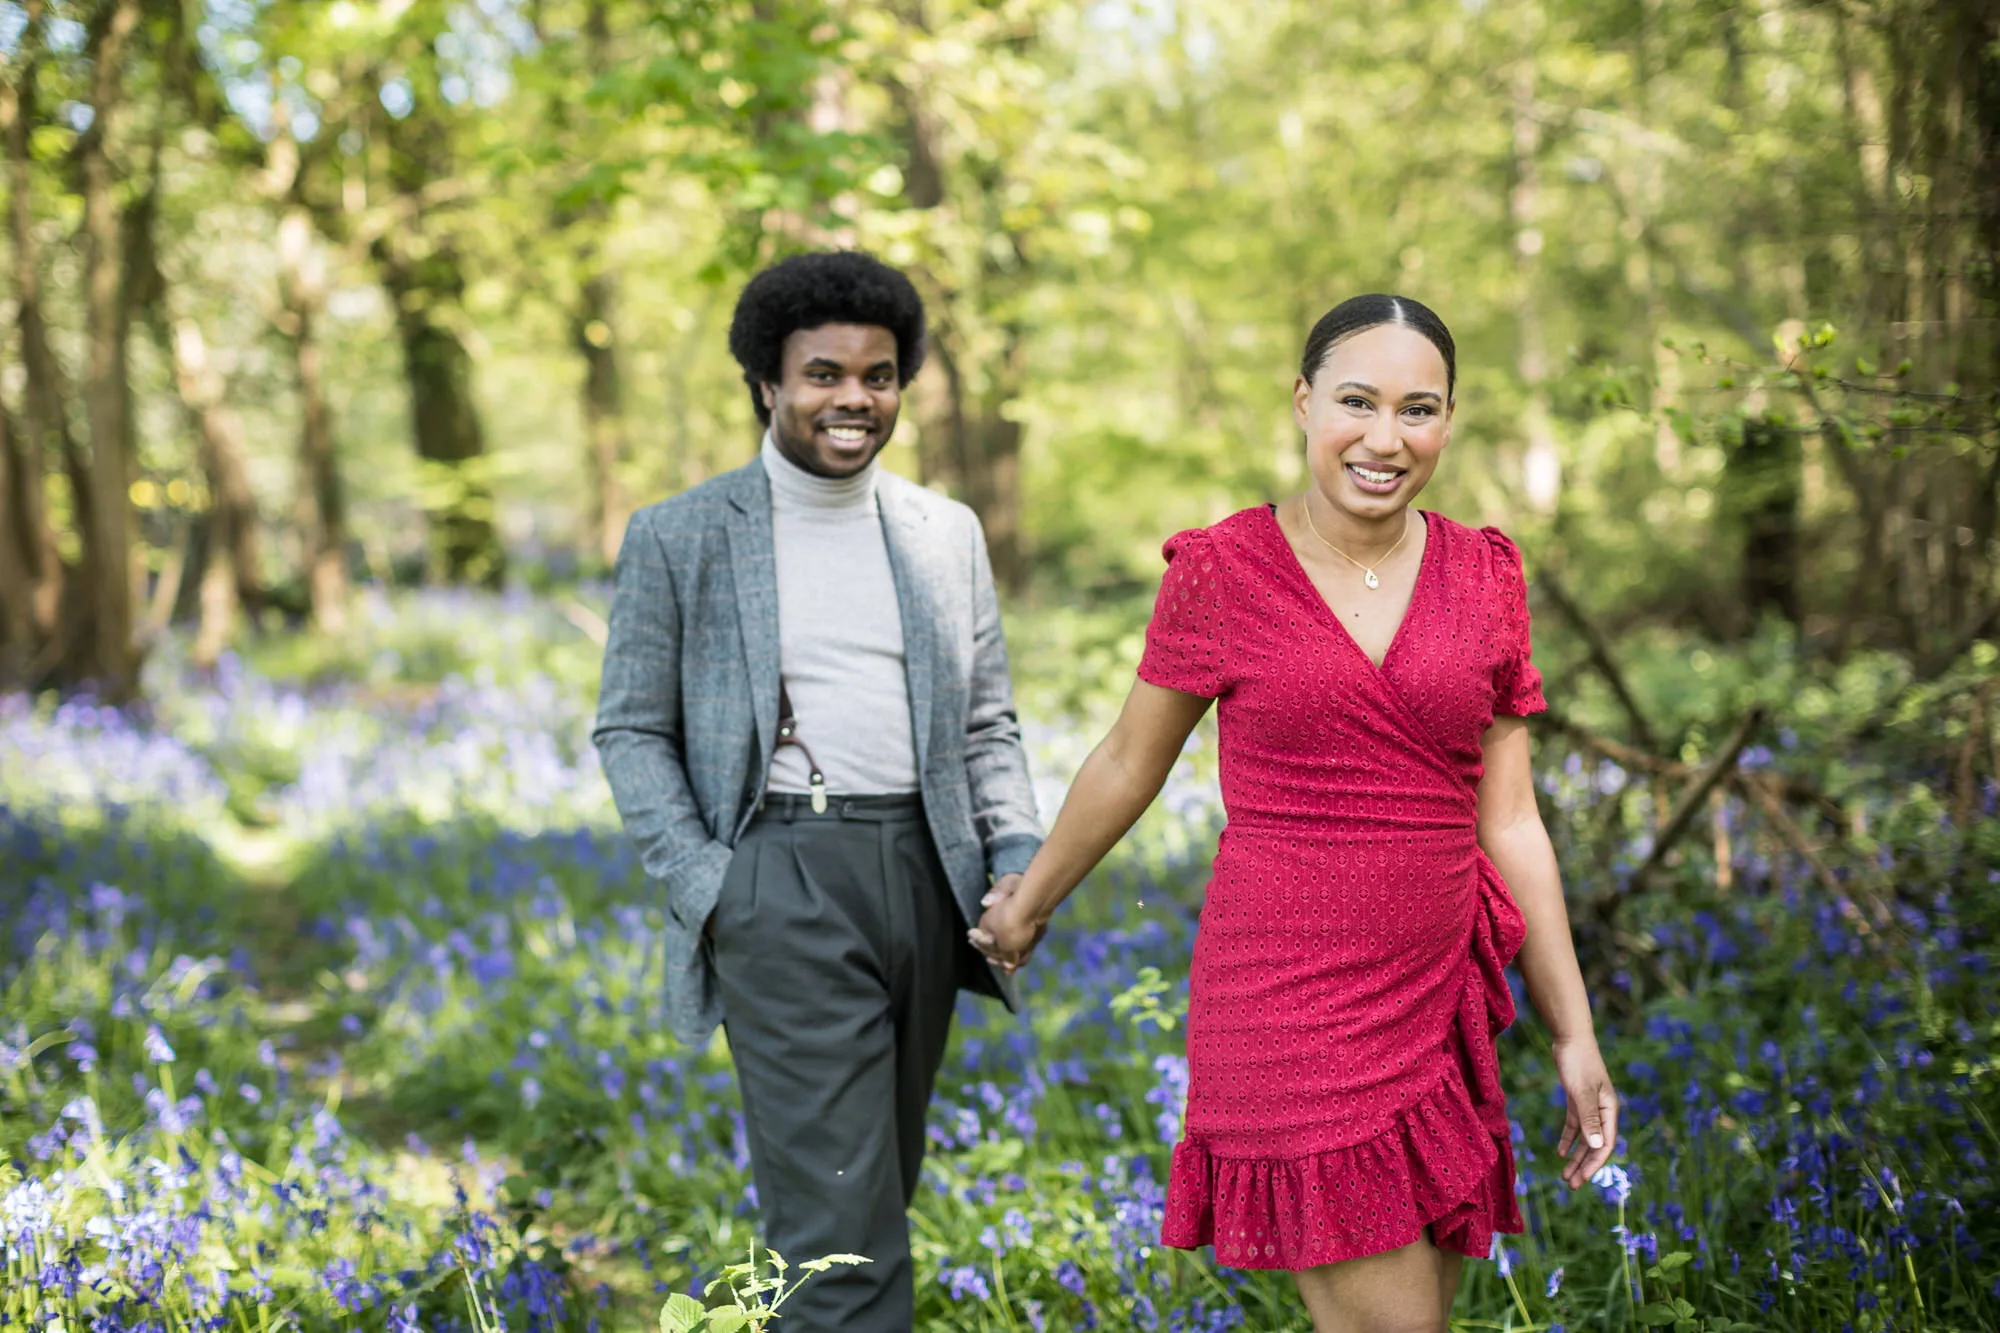 Engagement Photo Shoot - couple walking together in bluebell woodland in West Sussex